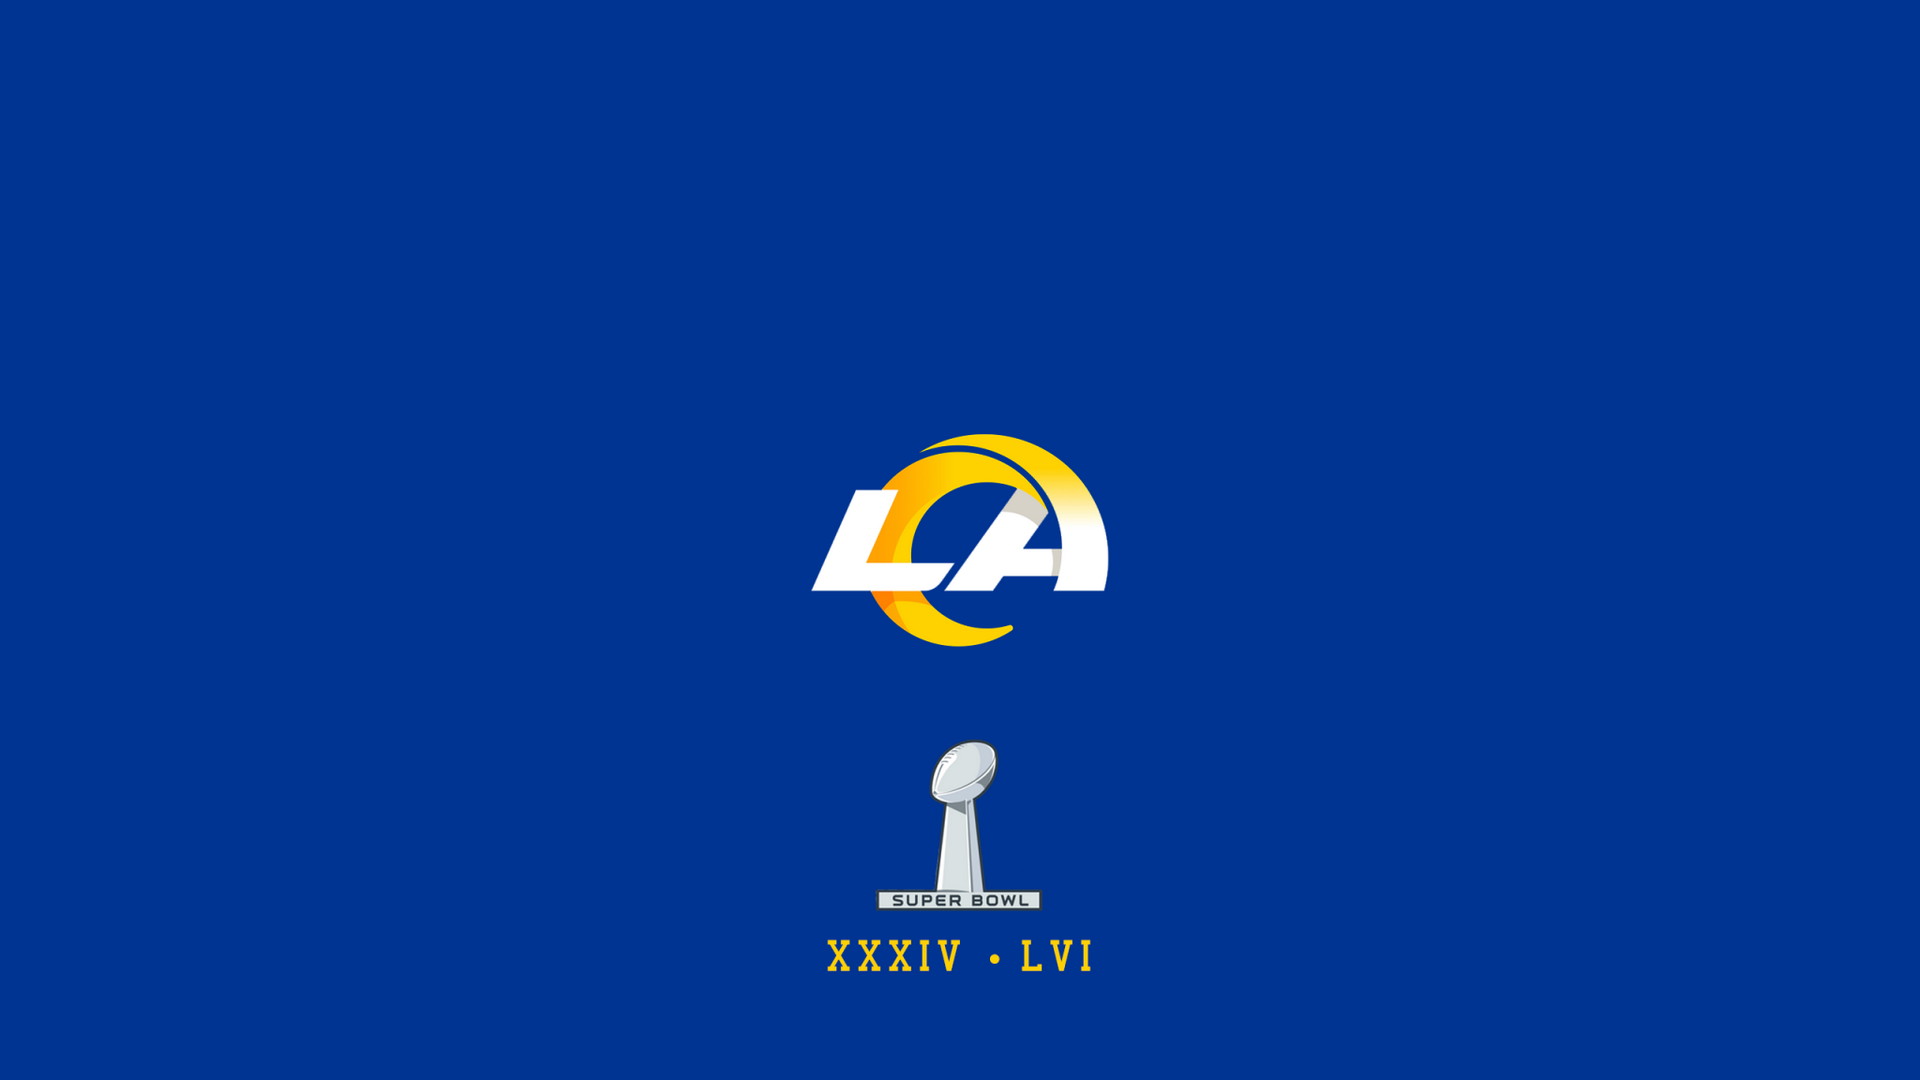 Wallpaper Desktop LA Rams HD with high-resolution 1920x1080 pixel. You can use this wallpaper for your Mac or Windows Desktop Background, iPhone, Android or Tablet and another Smartphone device